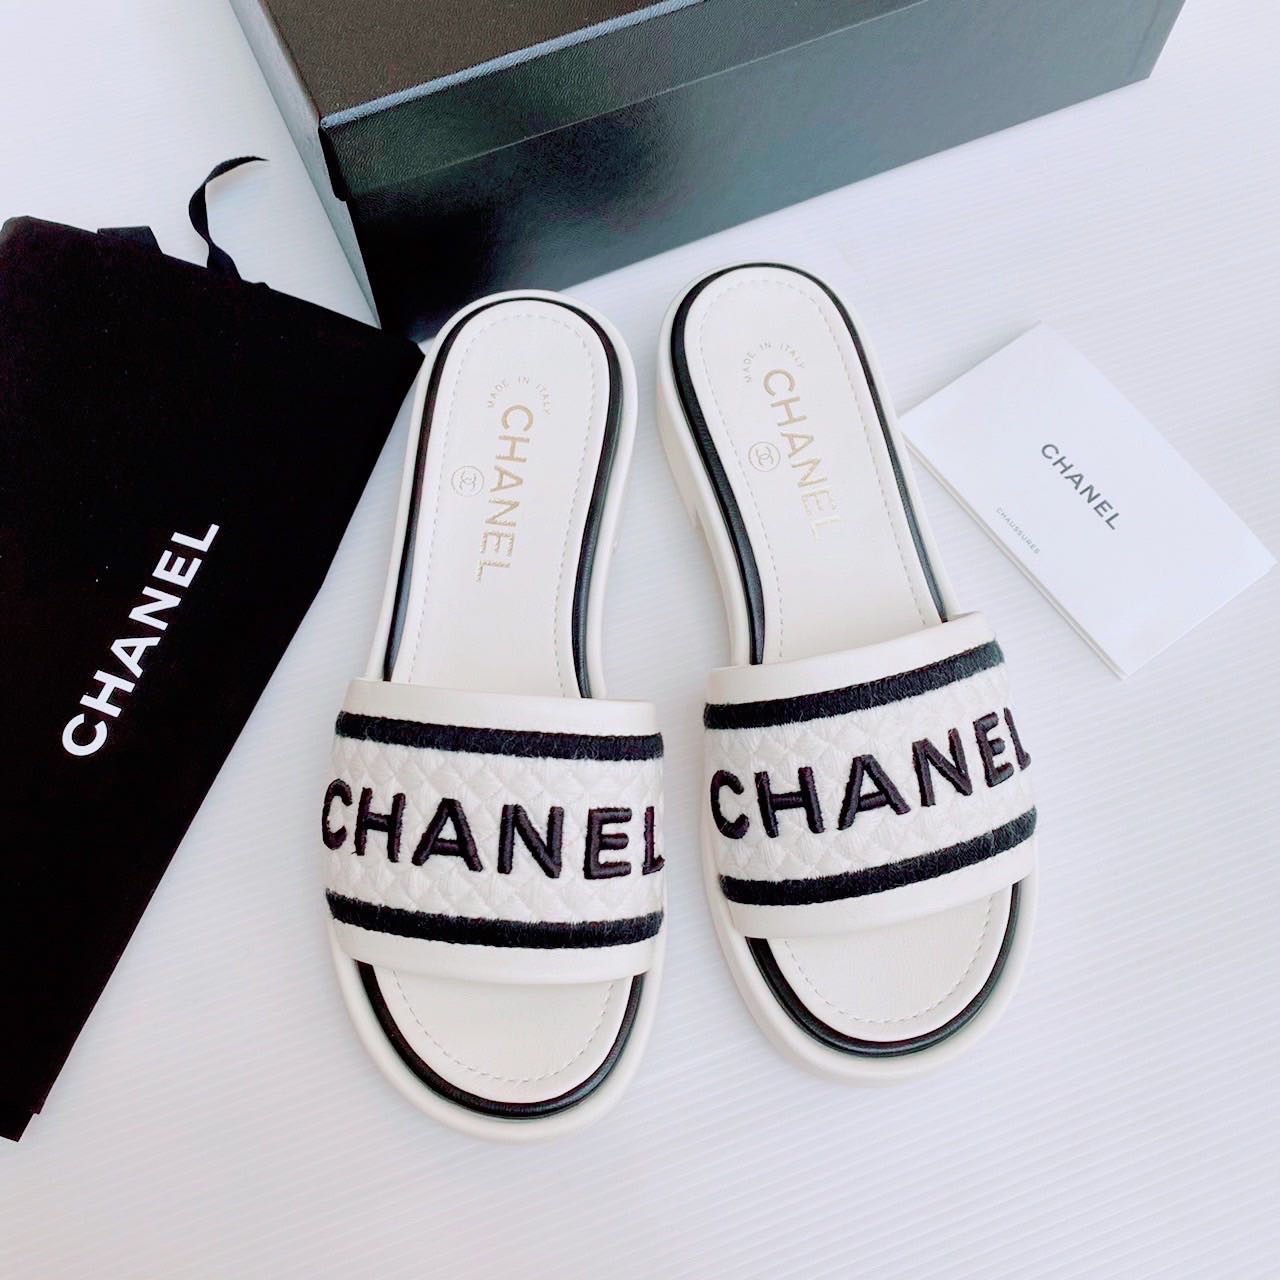 New Chanel sandals shoes